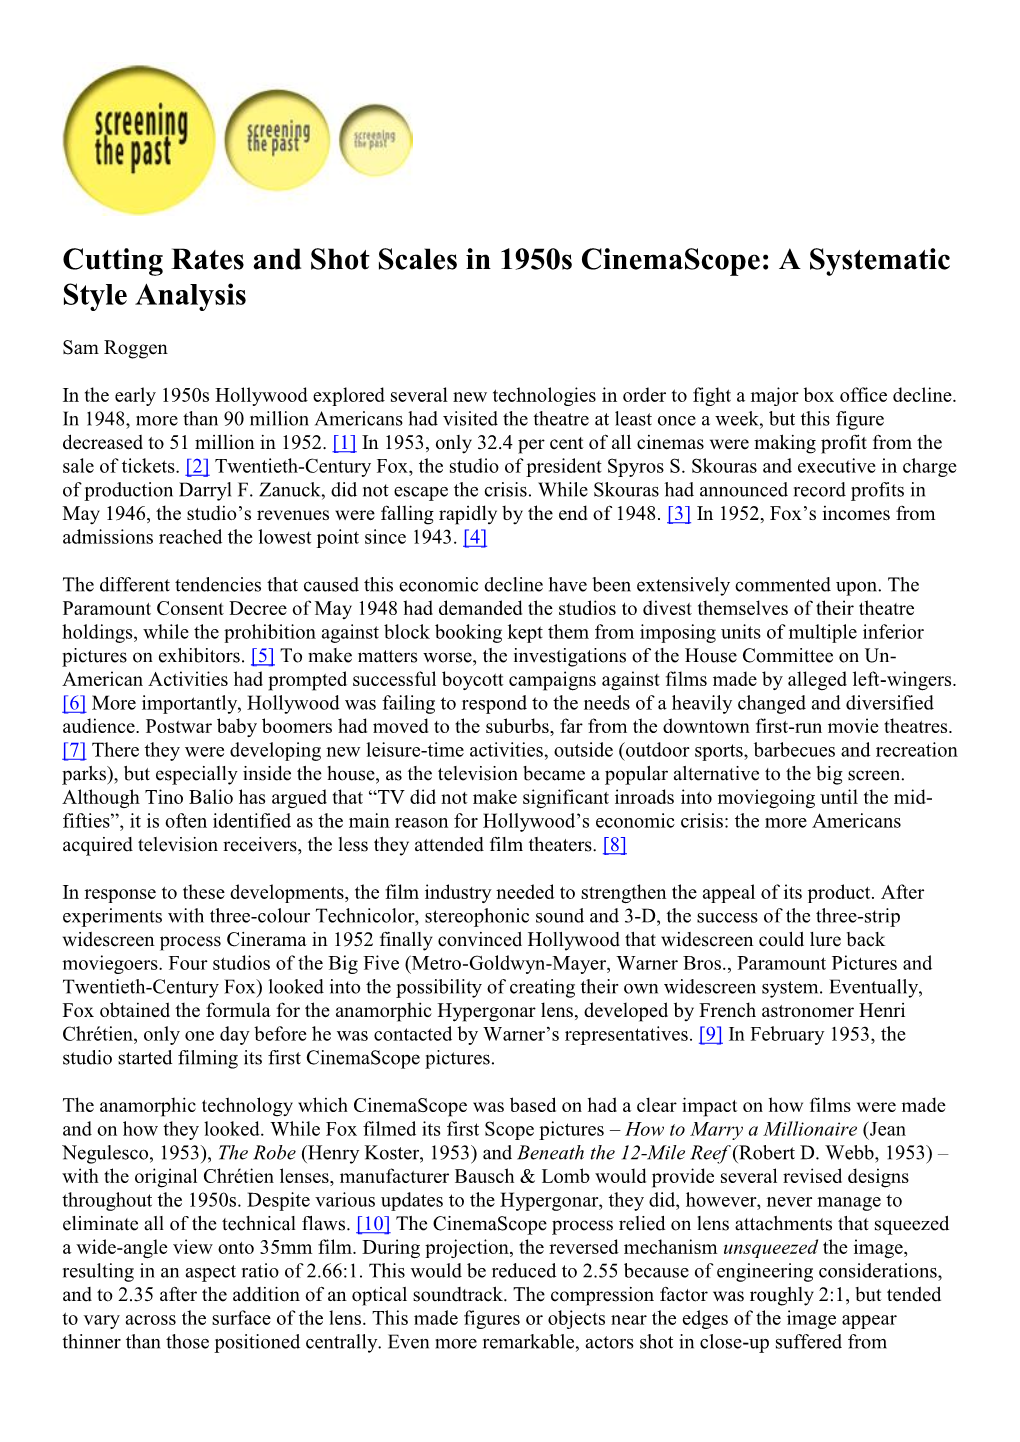 Cutting Rates and Shot Scales in 1950S Cinemascope: a Systematic Style Analysis